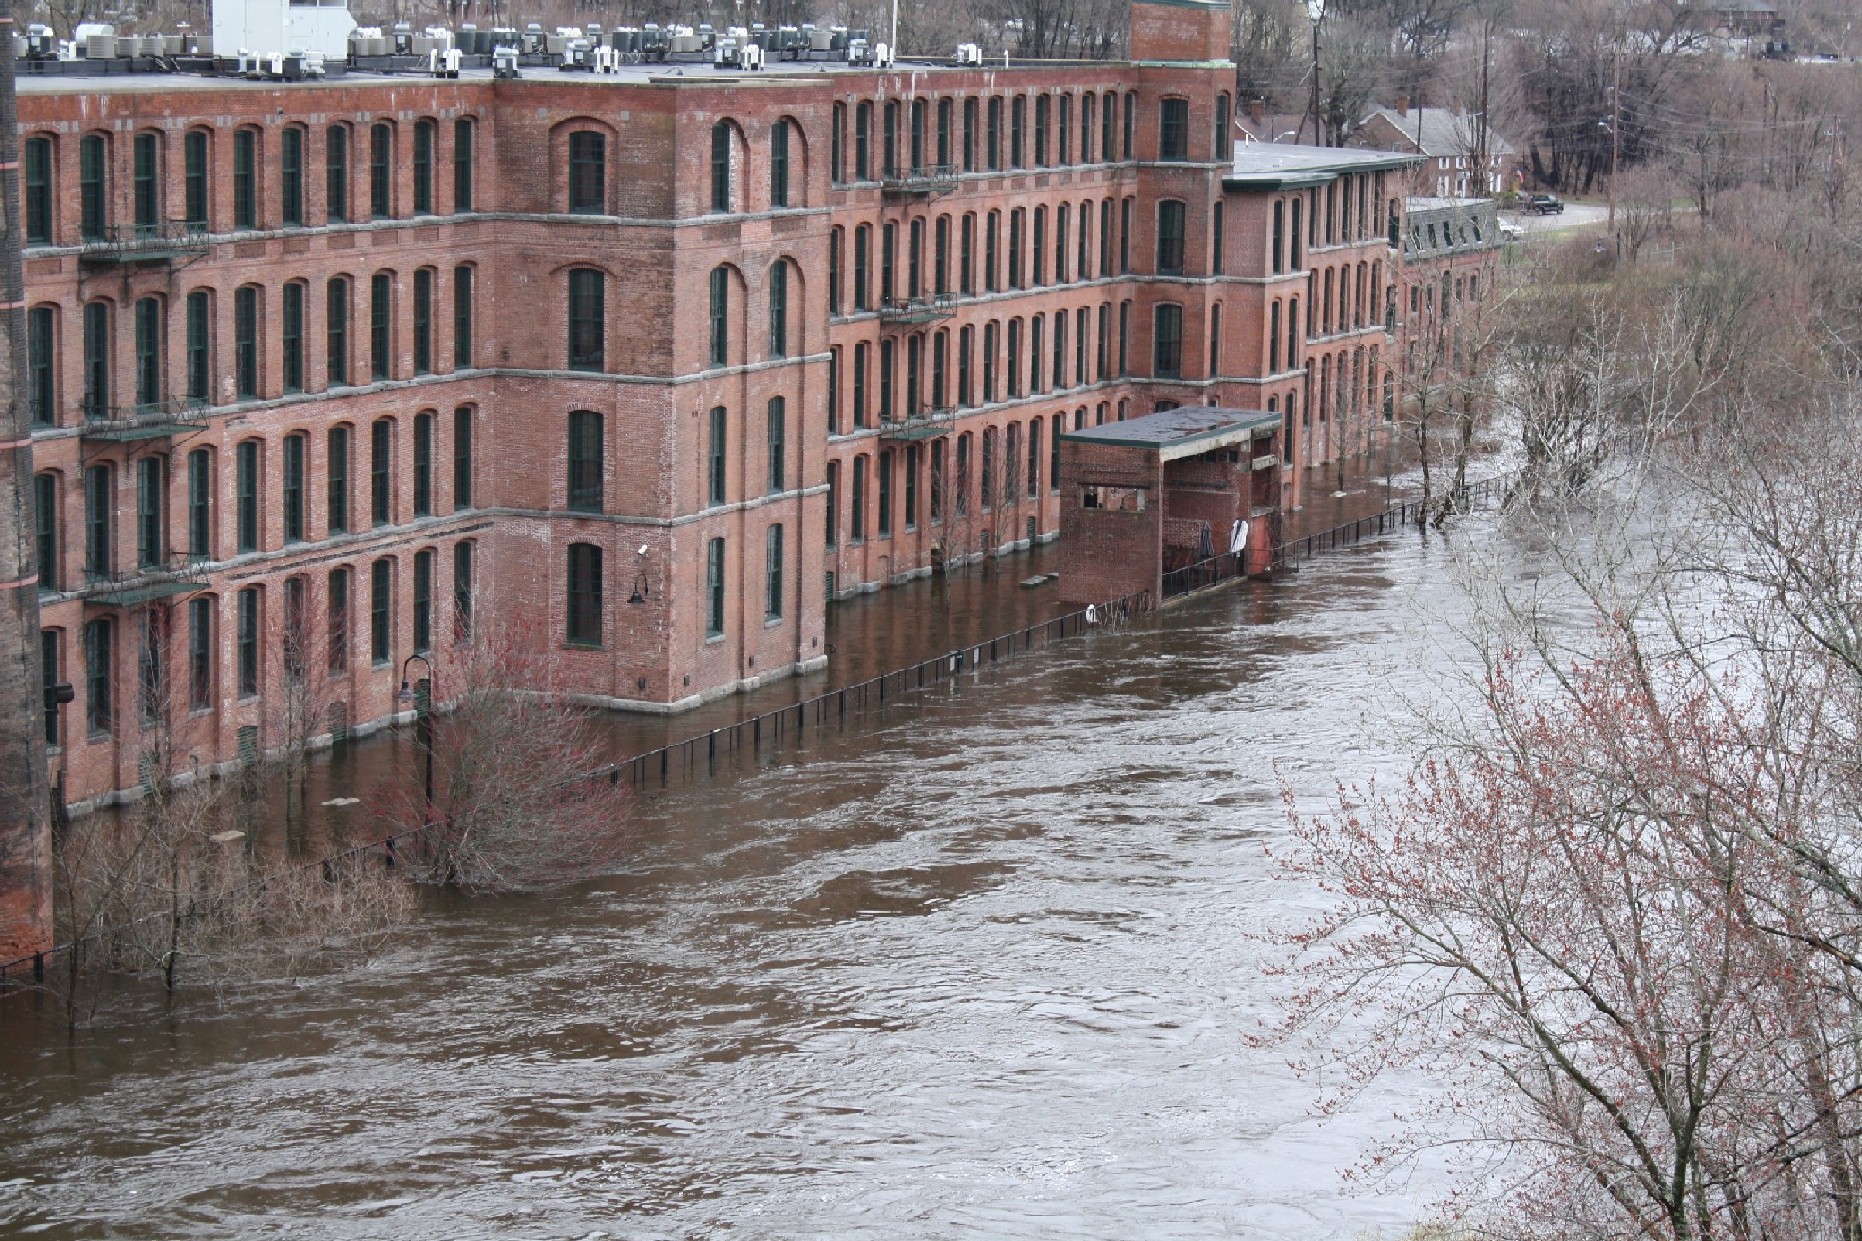 Significant Flooding Along the Blackstone River in Rhode Island